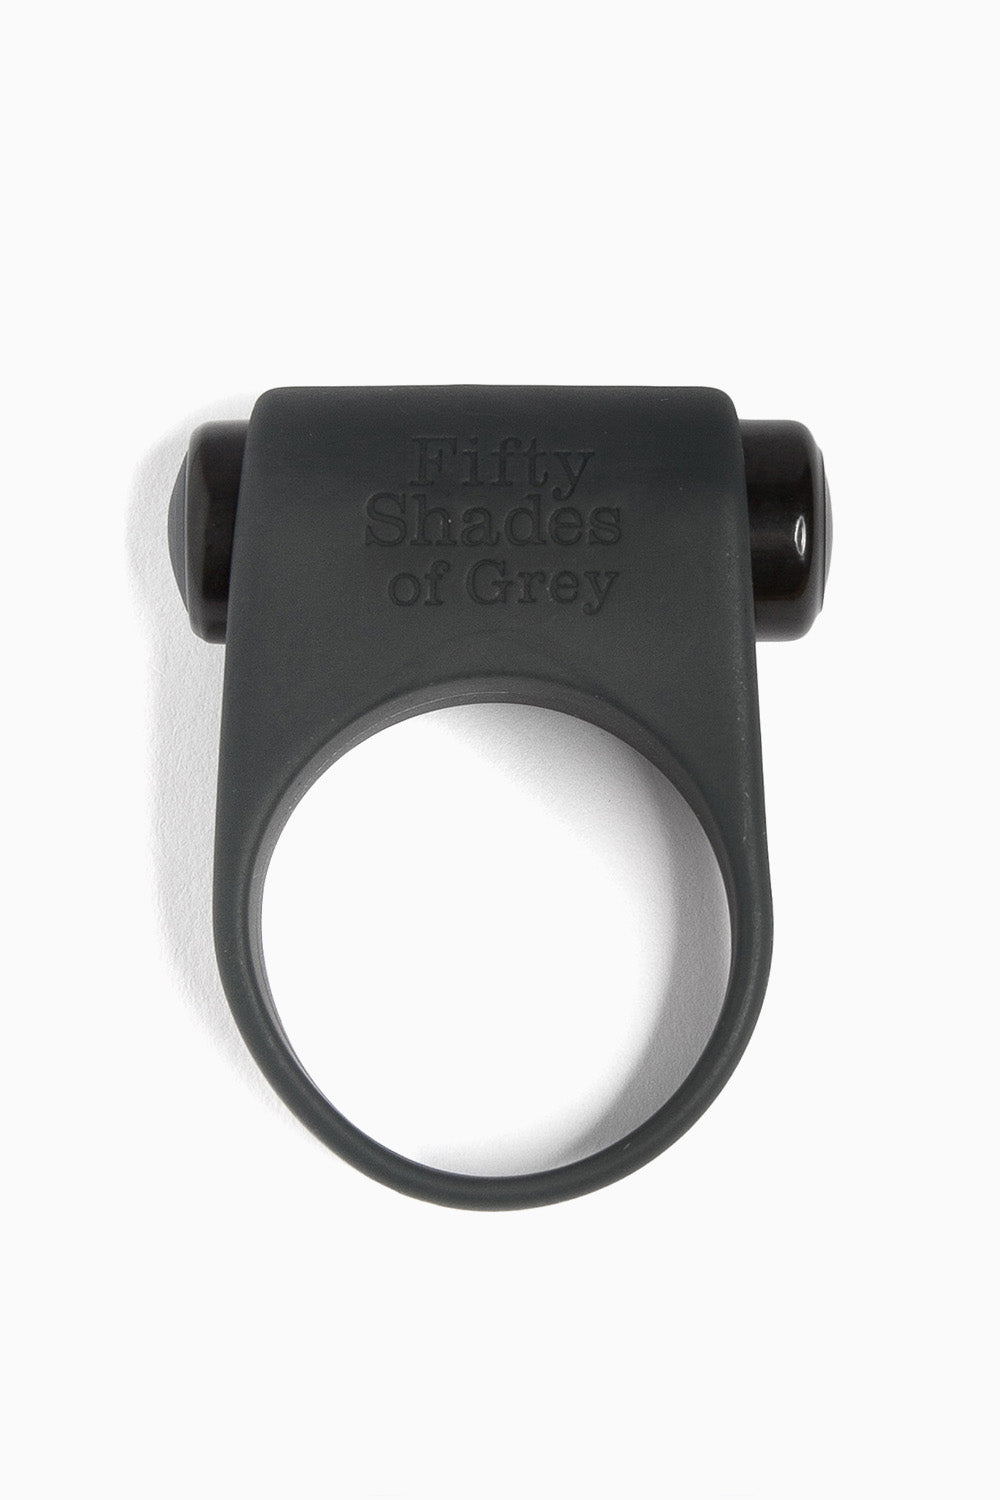 Fifty Shades of Grey Feel It Vibrating Cock Ring